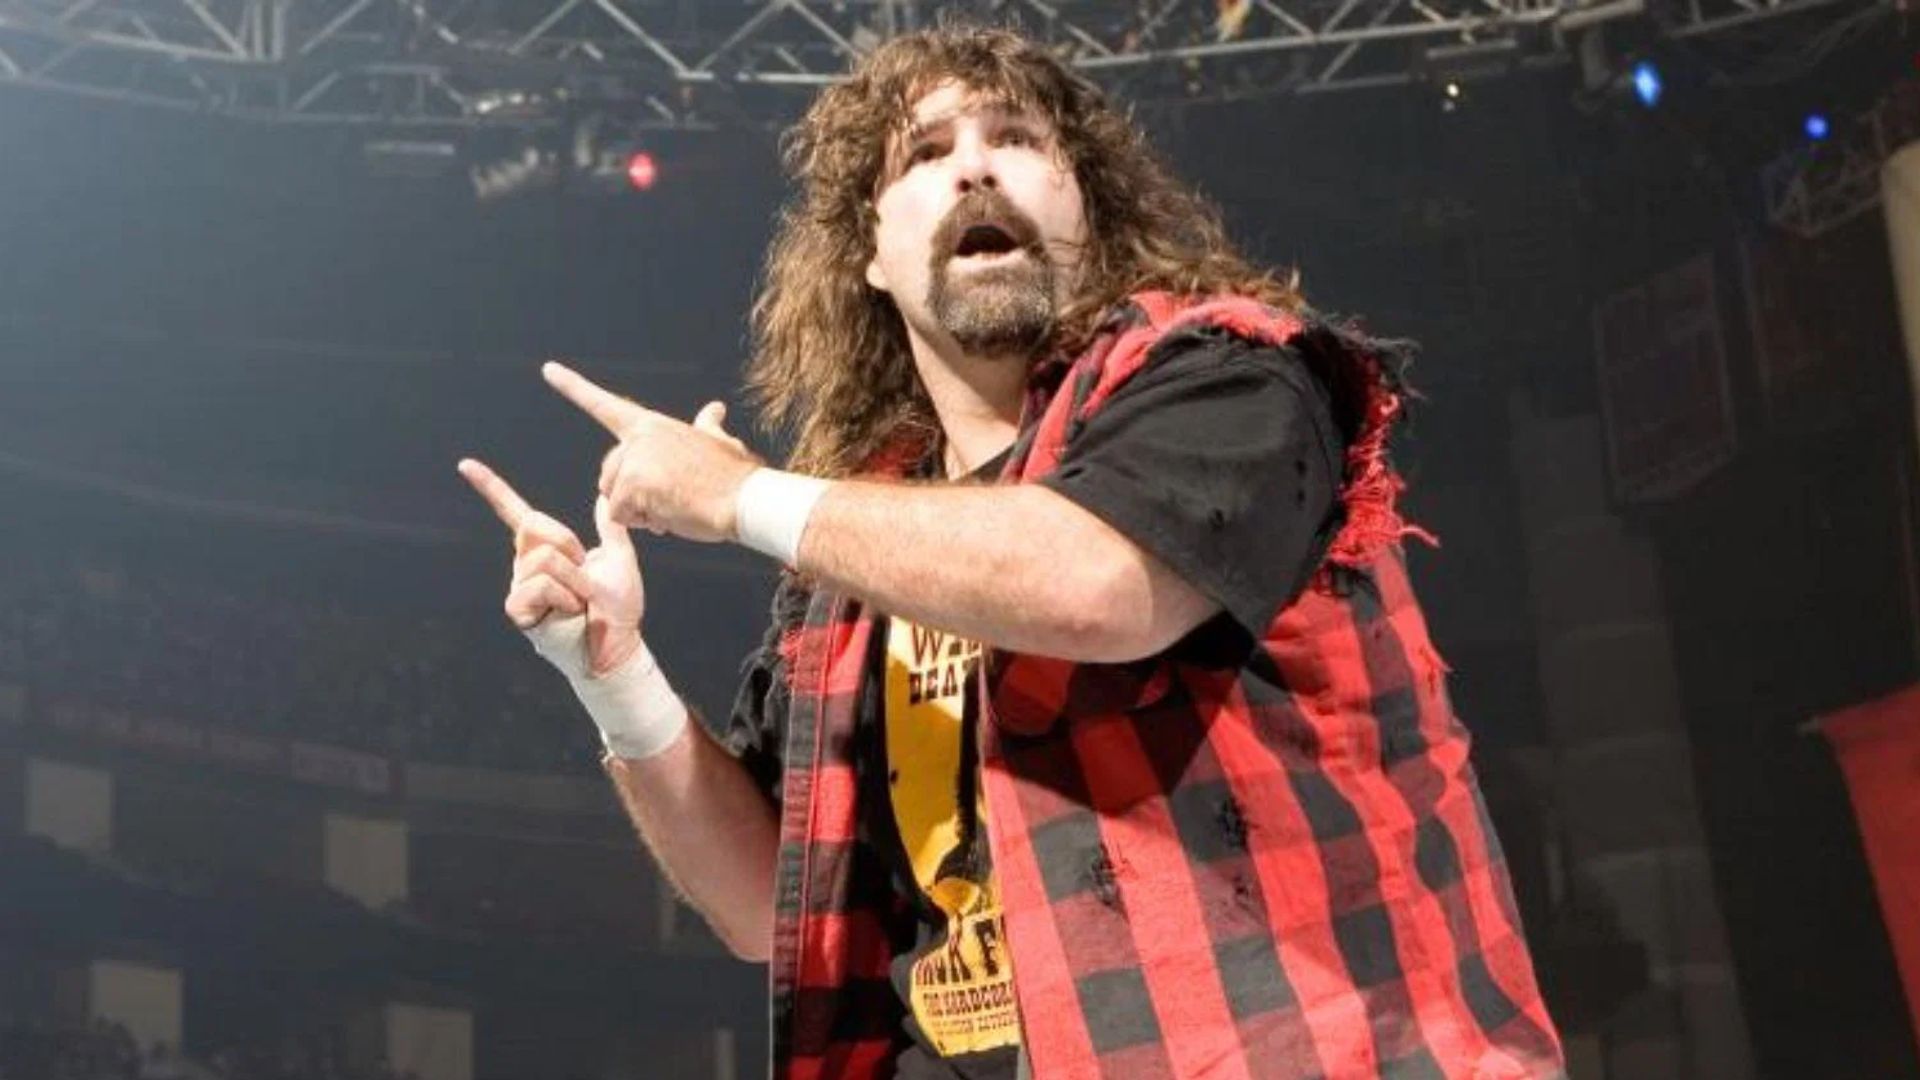 Mick Foley is a WWE Hall of Famer